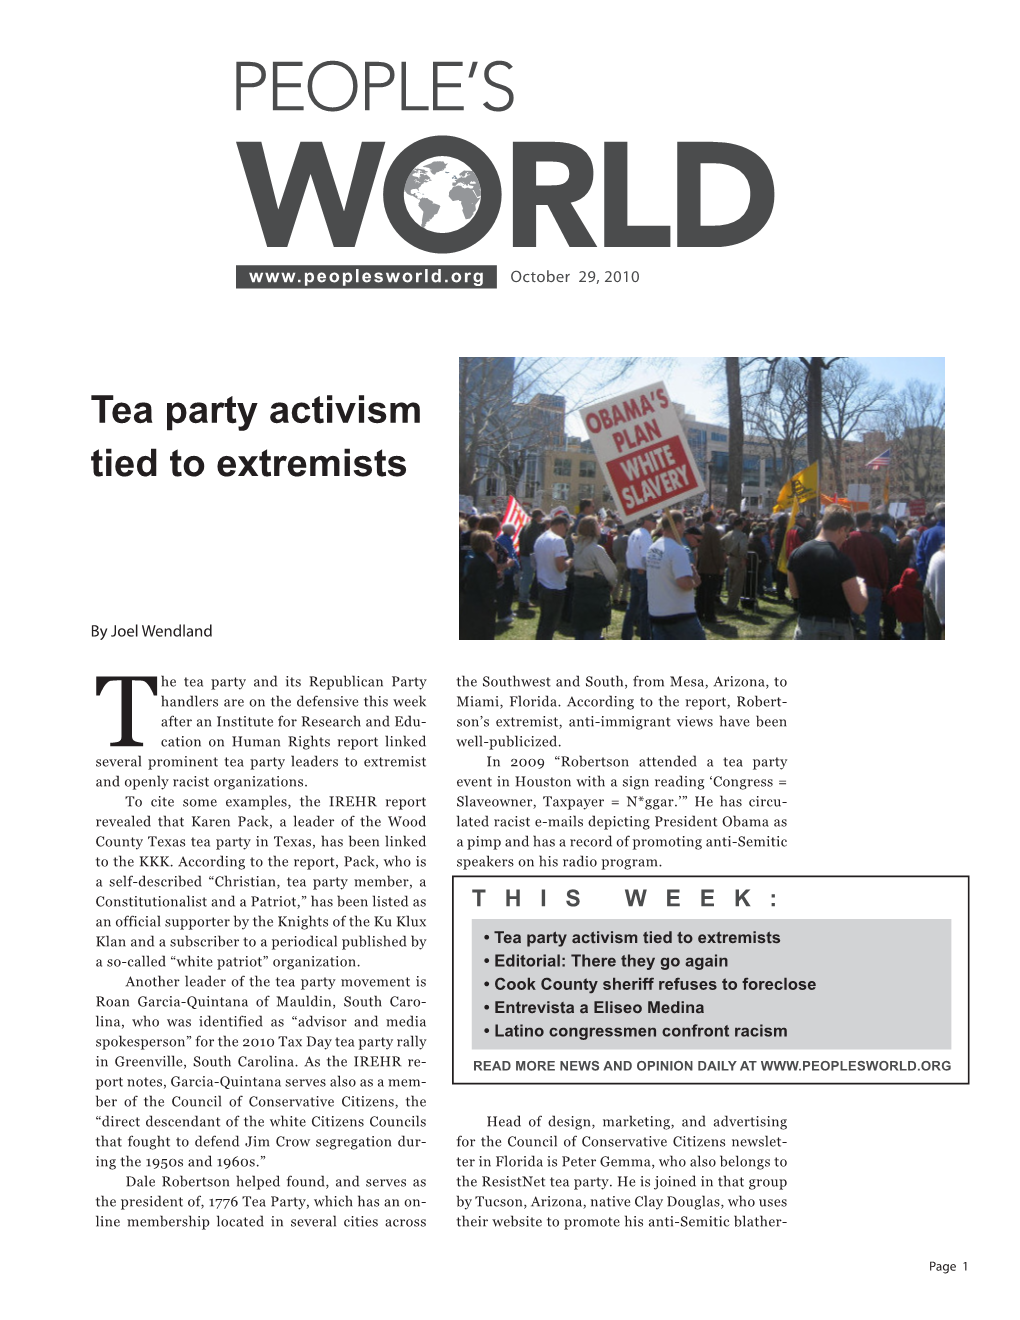 Tea Party Activism Tied to Extremists